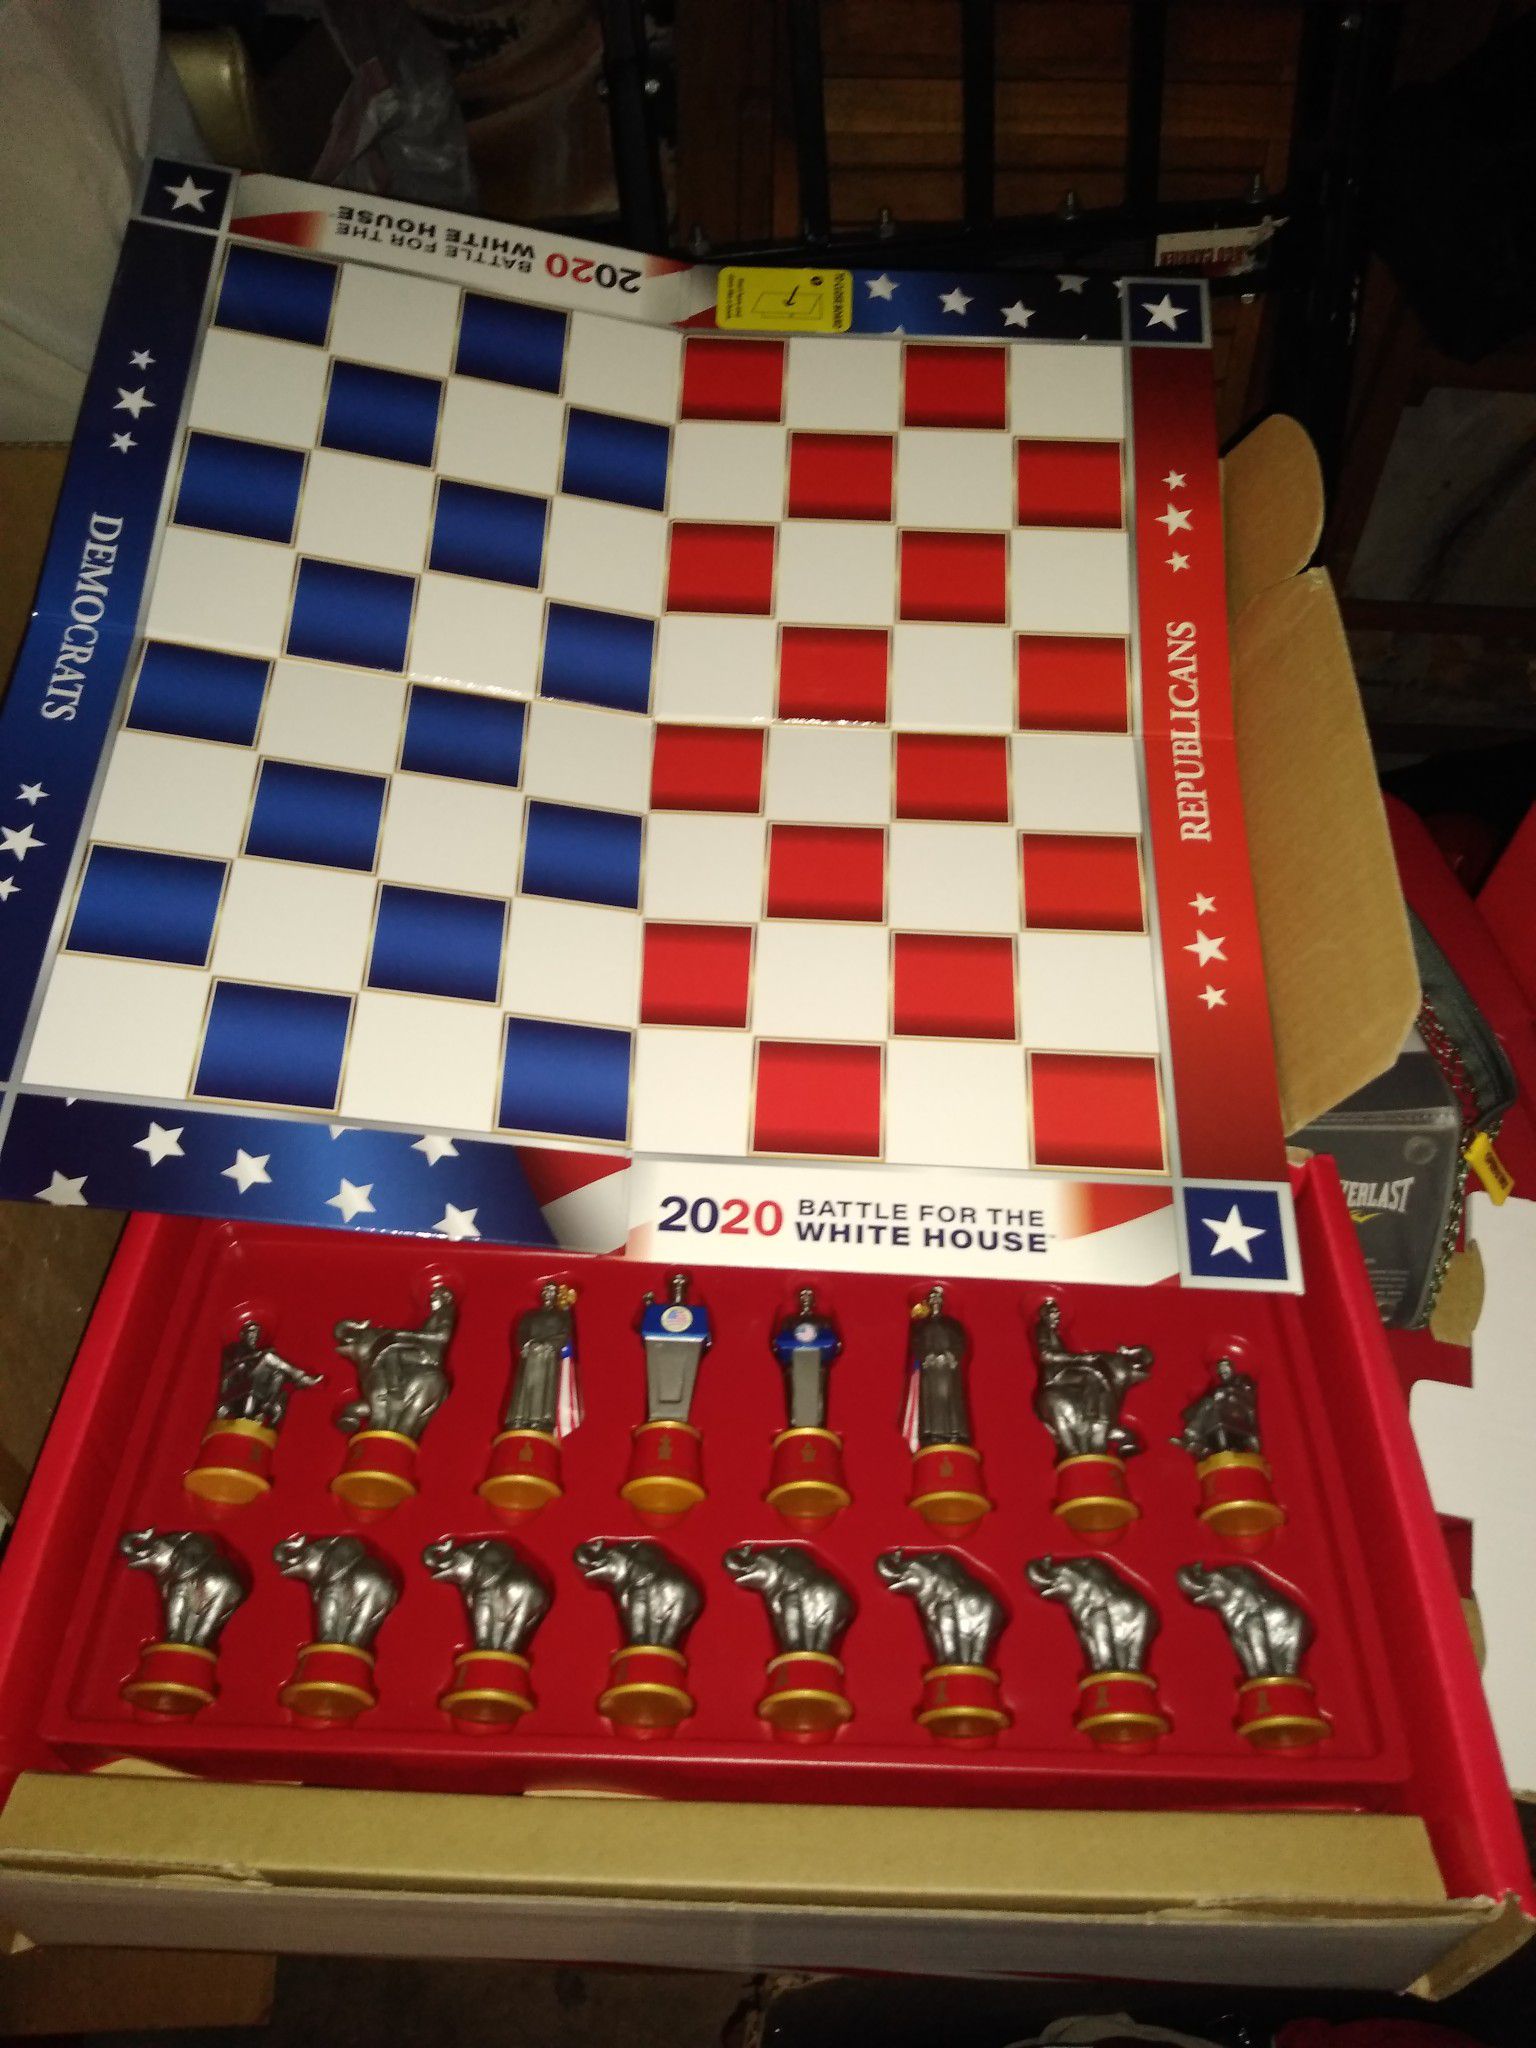 Battle for the white house board game